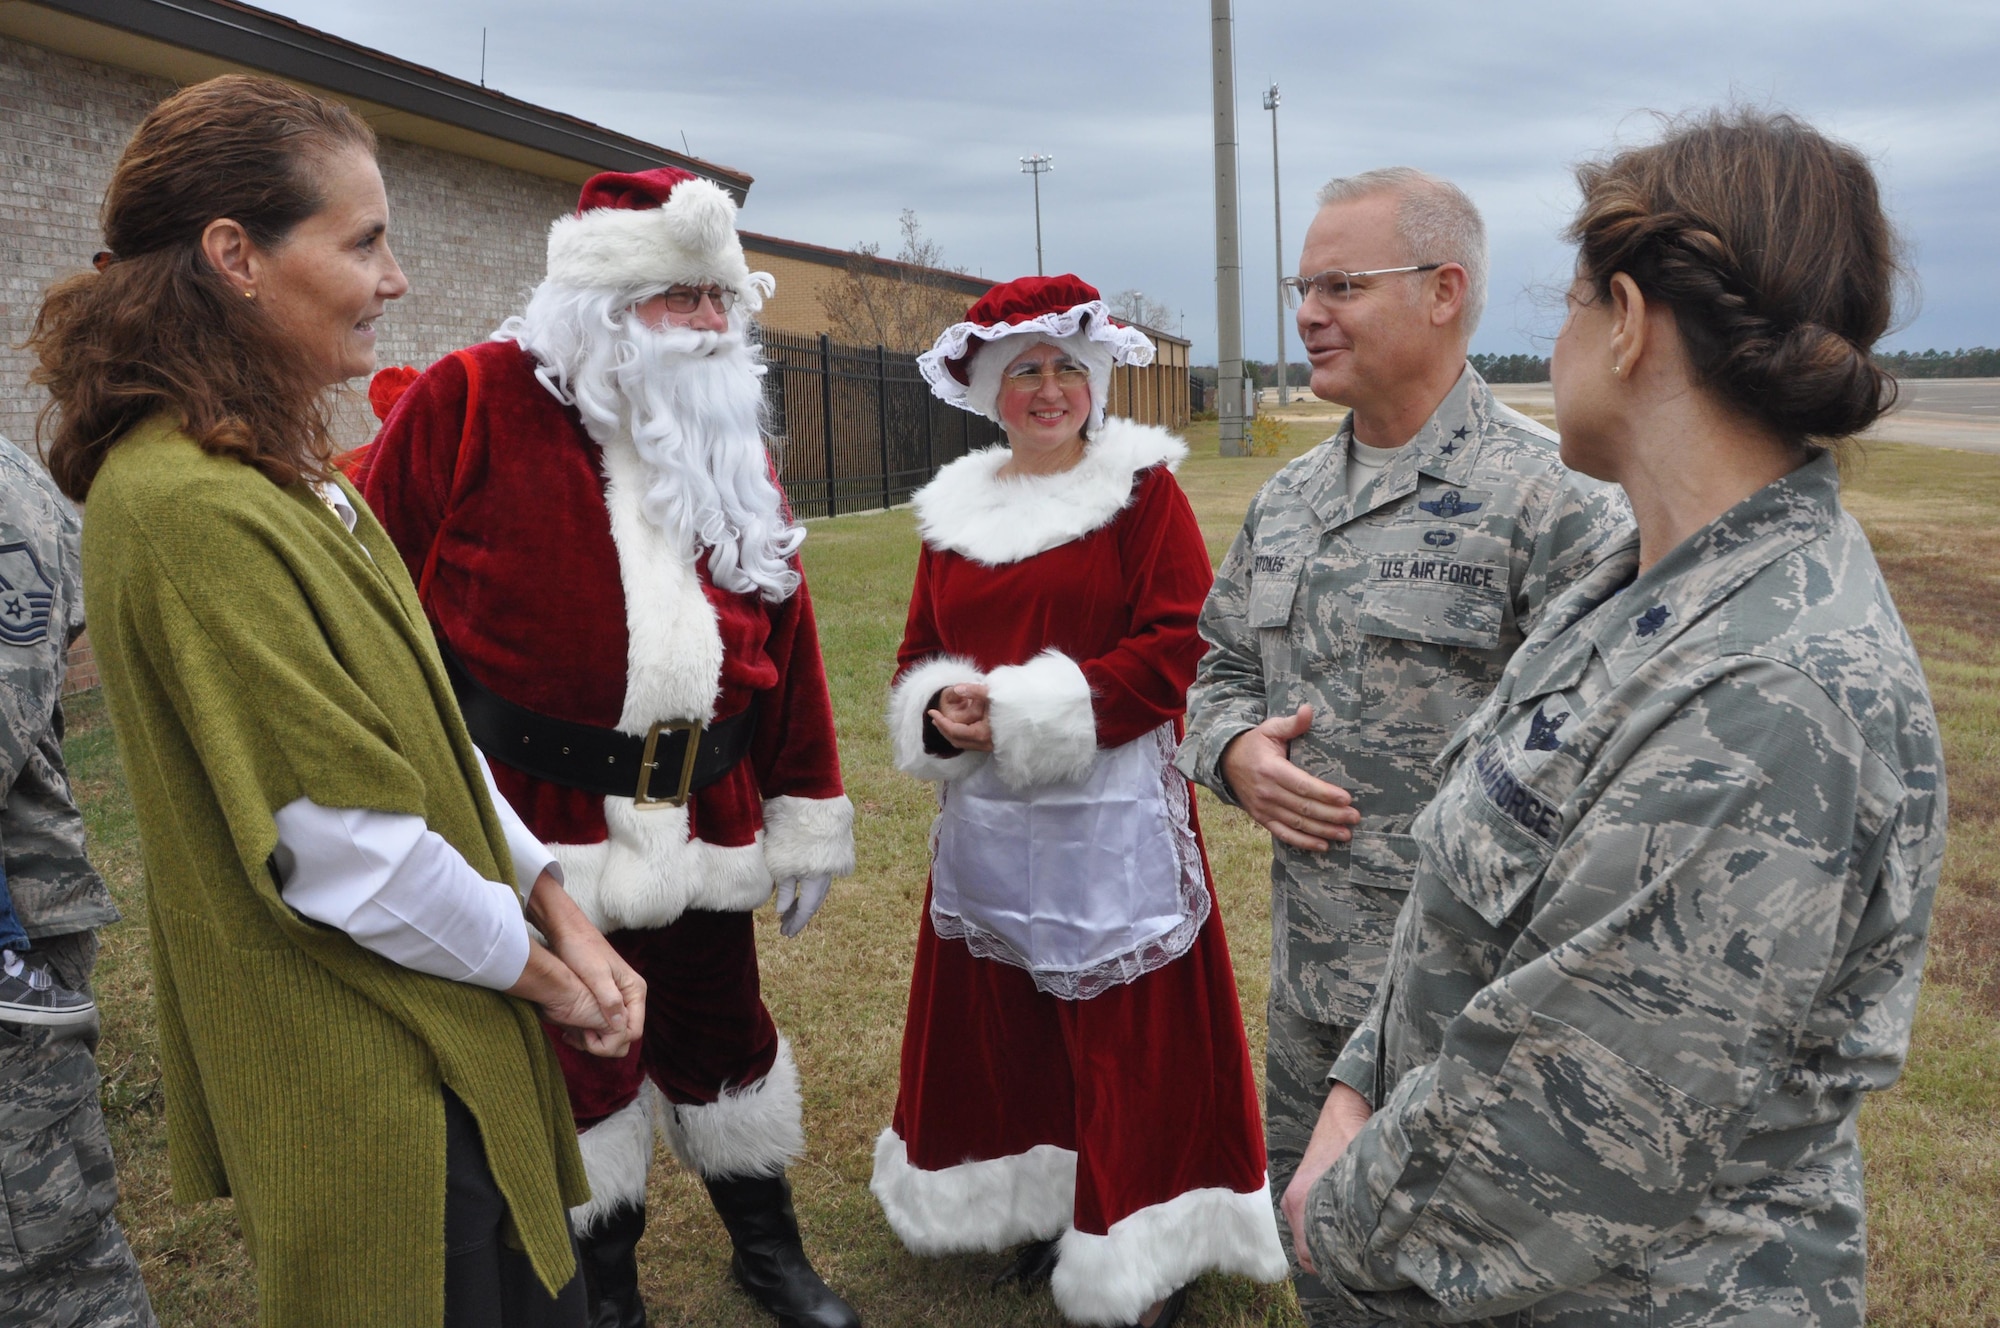 Santa and Mrs. Claus talk with Sandy Stokes (Left) wife of 22nd Air Force Commanding General, Maj. Gen. John Stokes, and Lt. Col. Nancy Stephenson (Right), executive officer of the 908th Airlift Wing during a visit to Maxwell Air Force Base Dec. 3. The Stokes were visiting the their old unit, the 908th before the winter holidays. (U.S. Air Force photo by Bradley J. Clark)